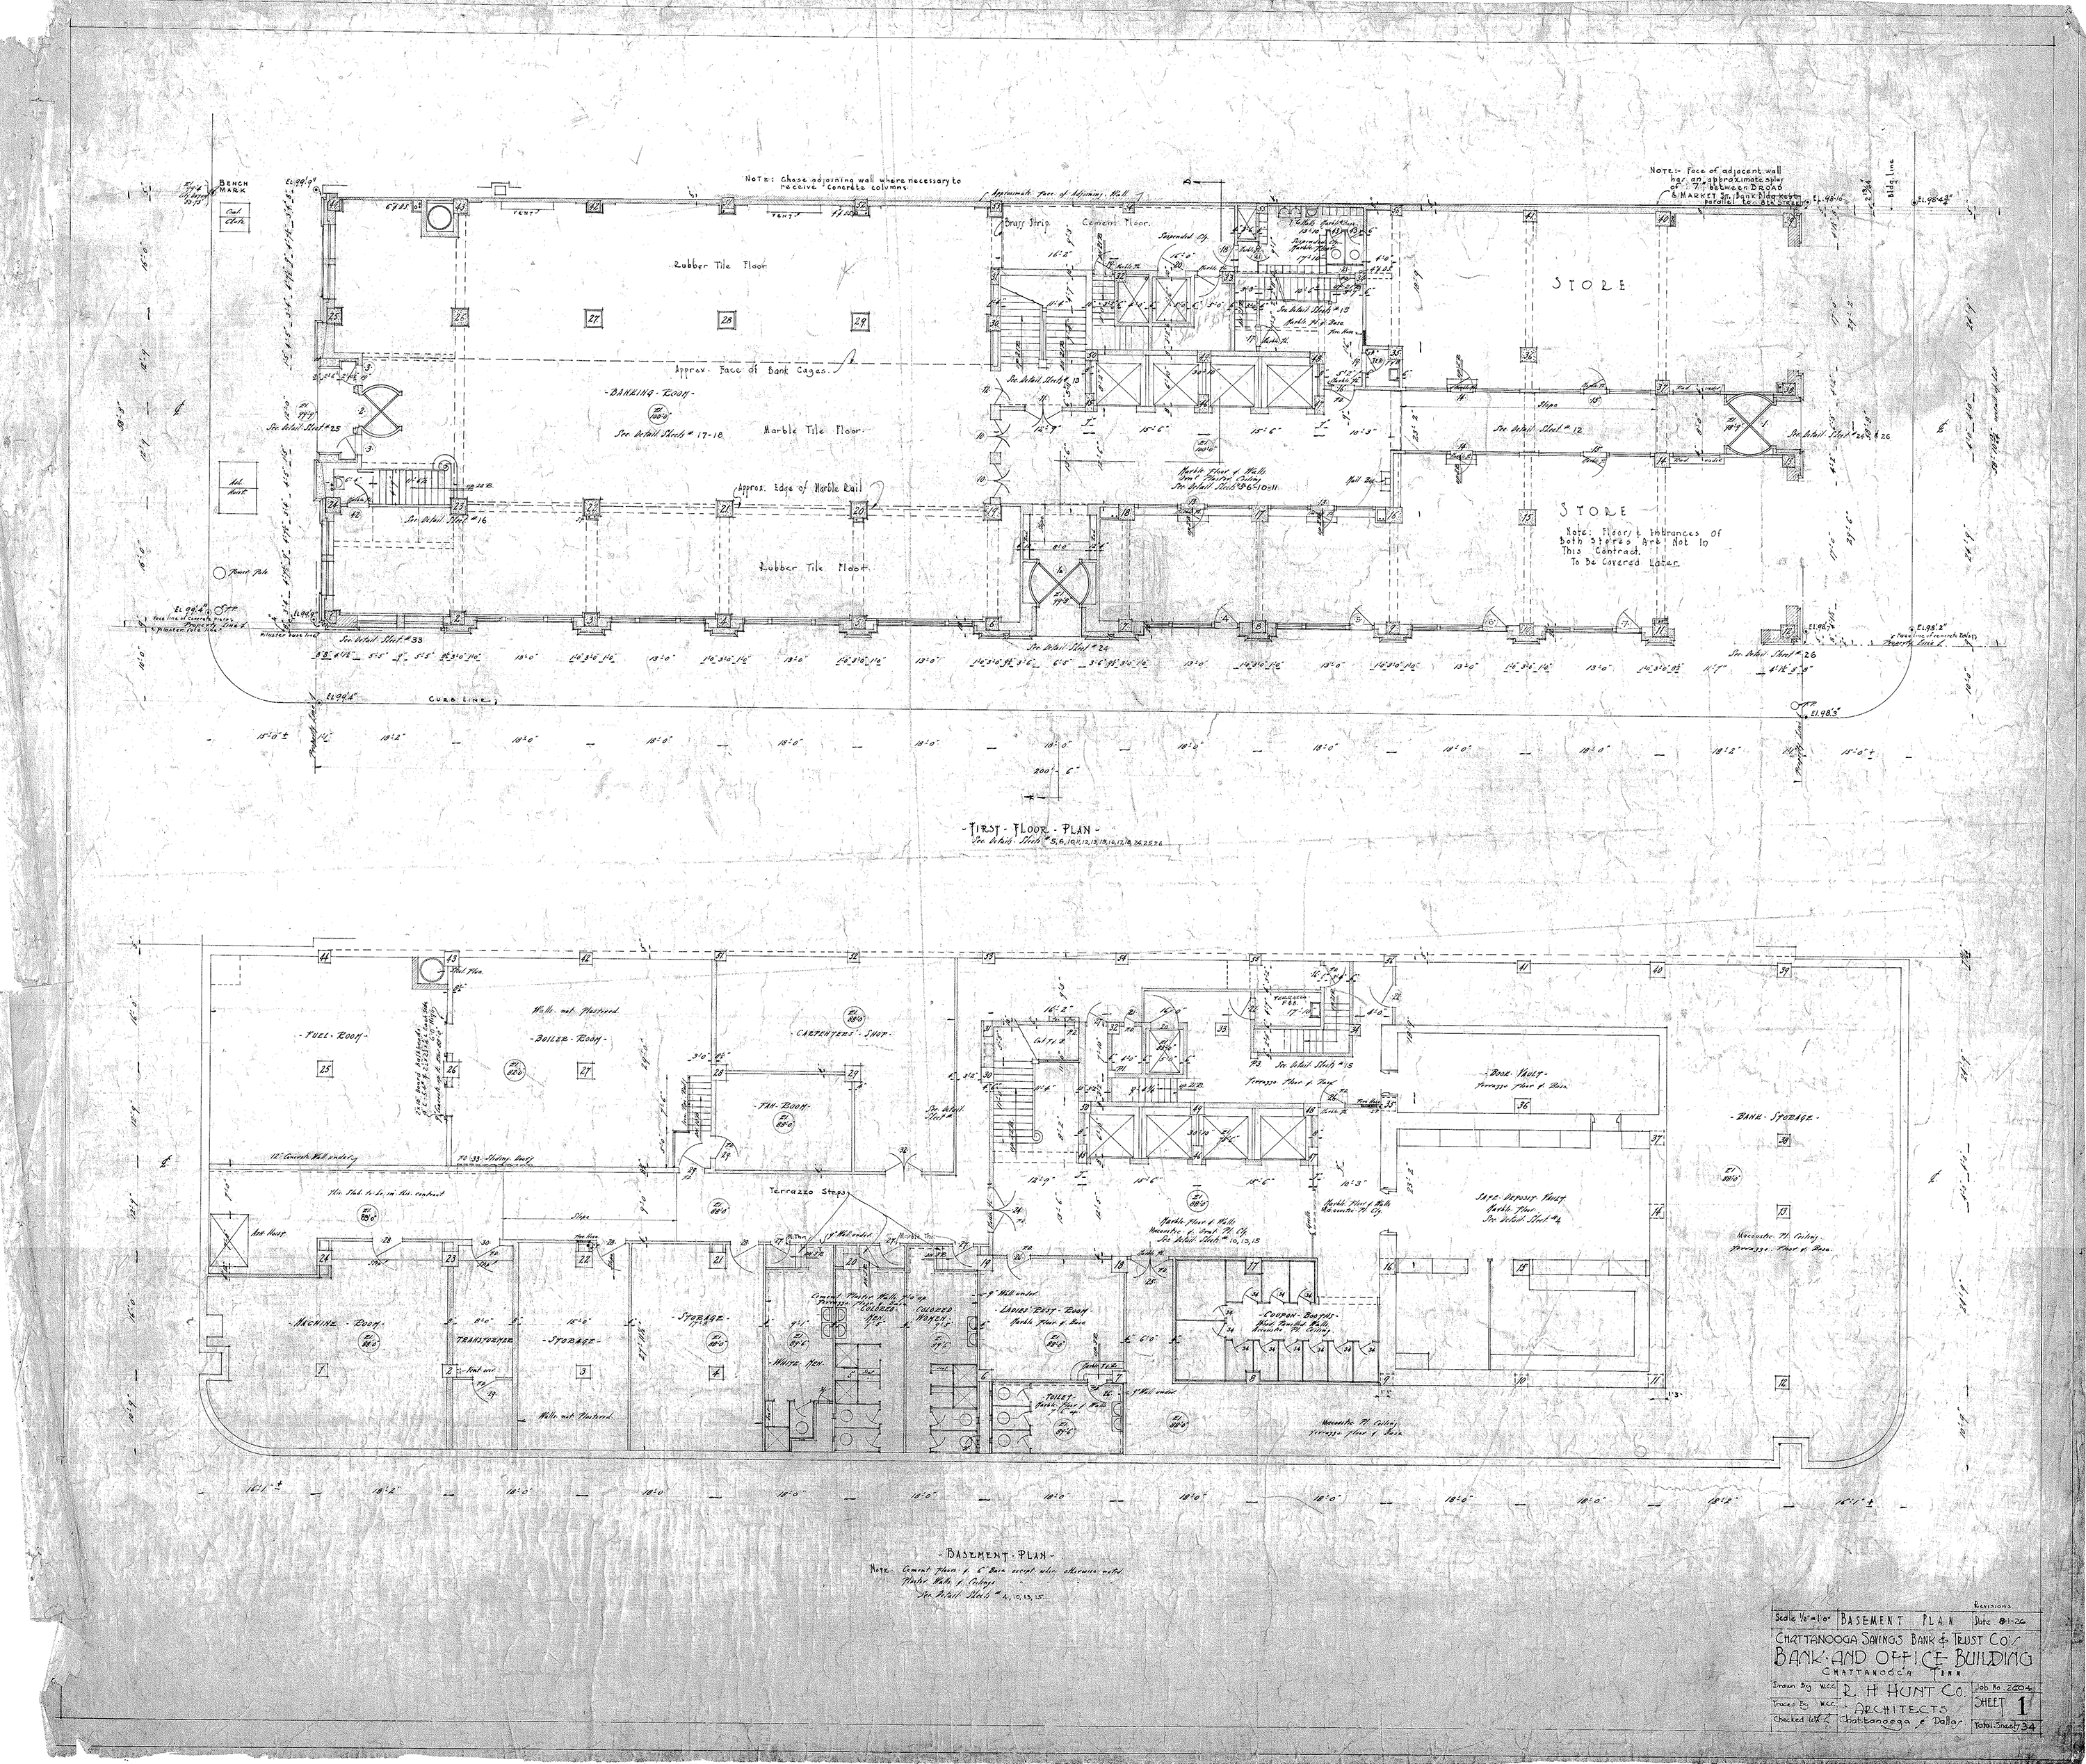 Original Chattanooga Bank Building drawings by R.H. Hunt. 